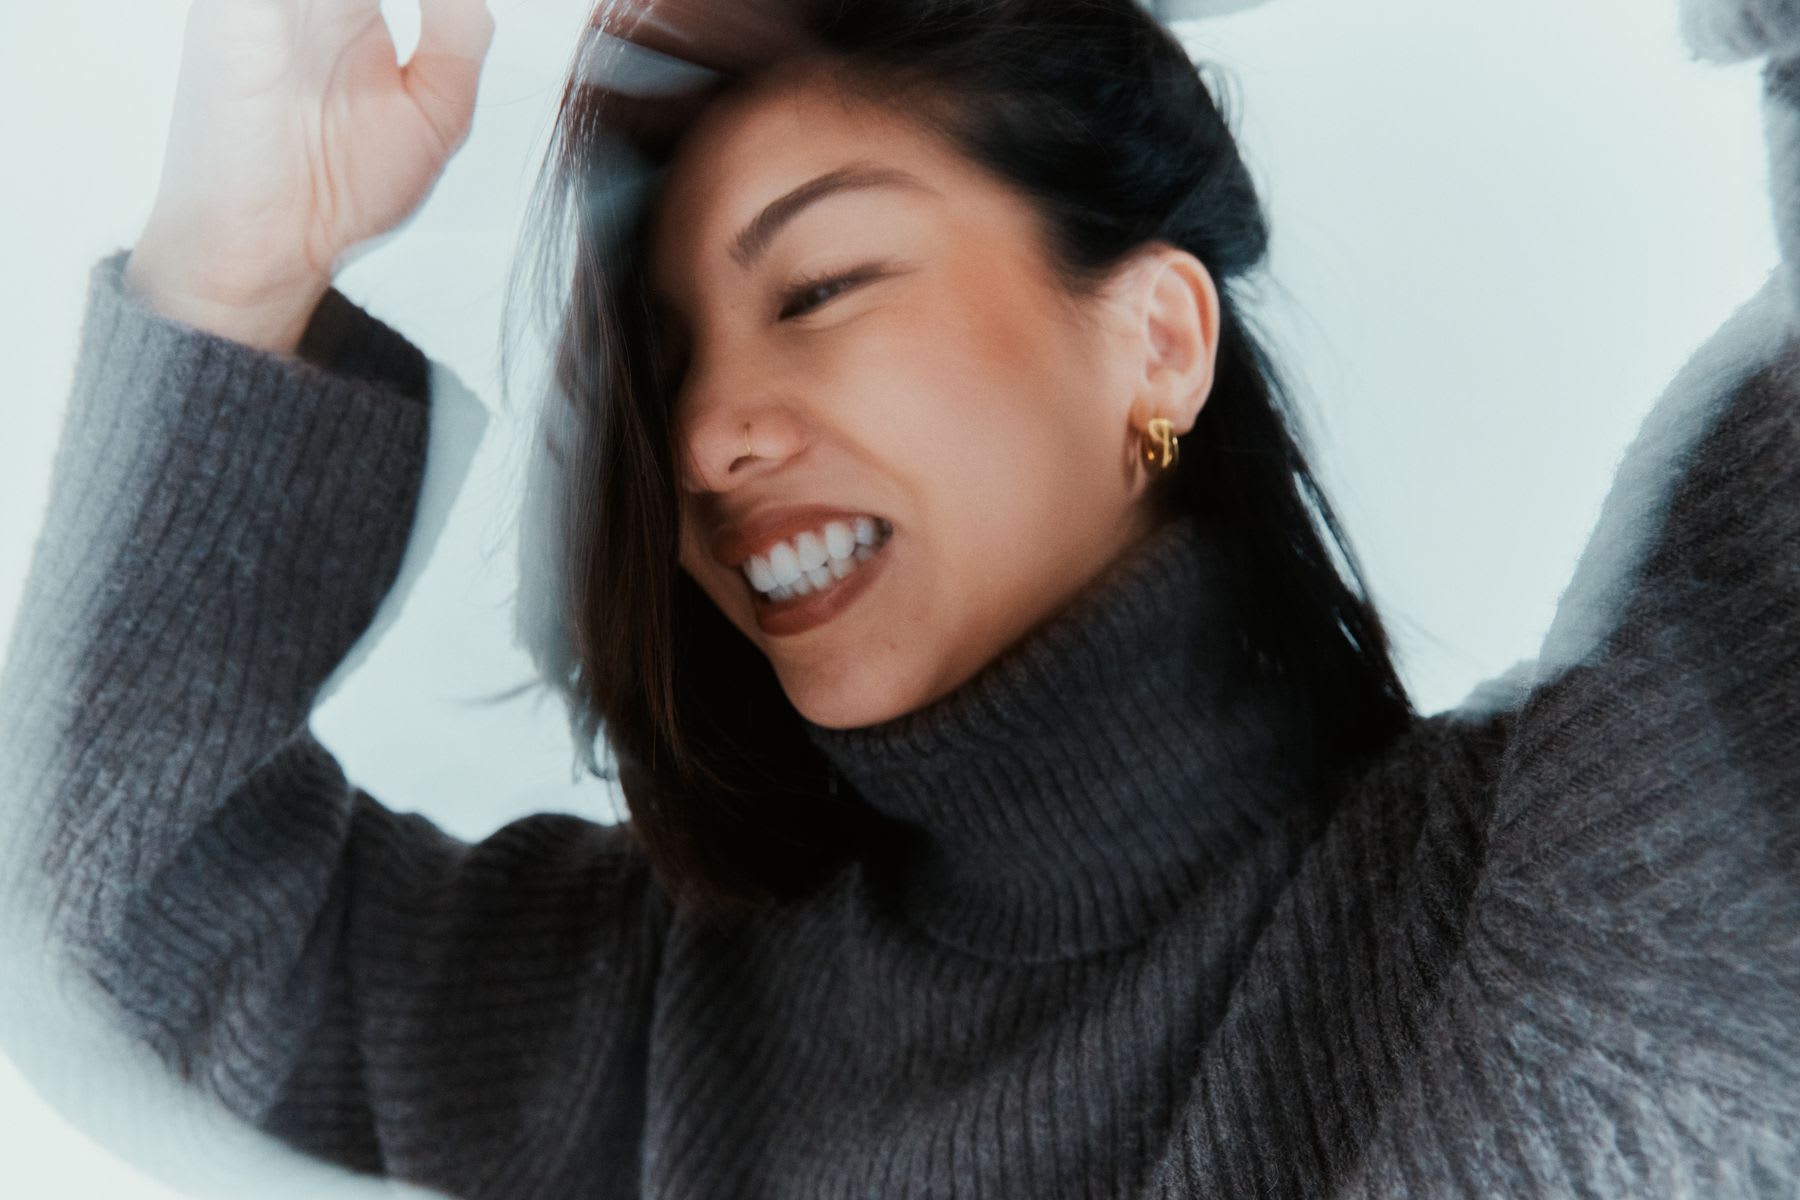 Smiling woman with a golden earring wearing a gray turtleneck and with her hands raised.